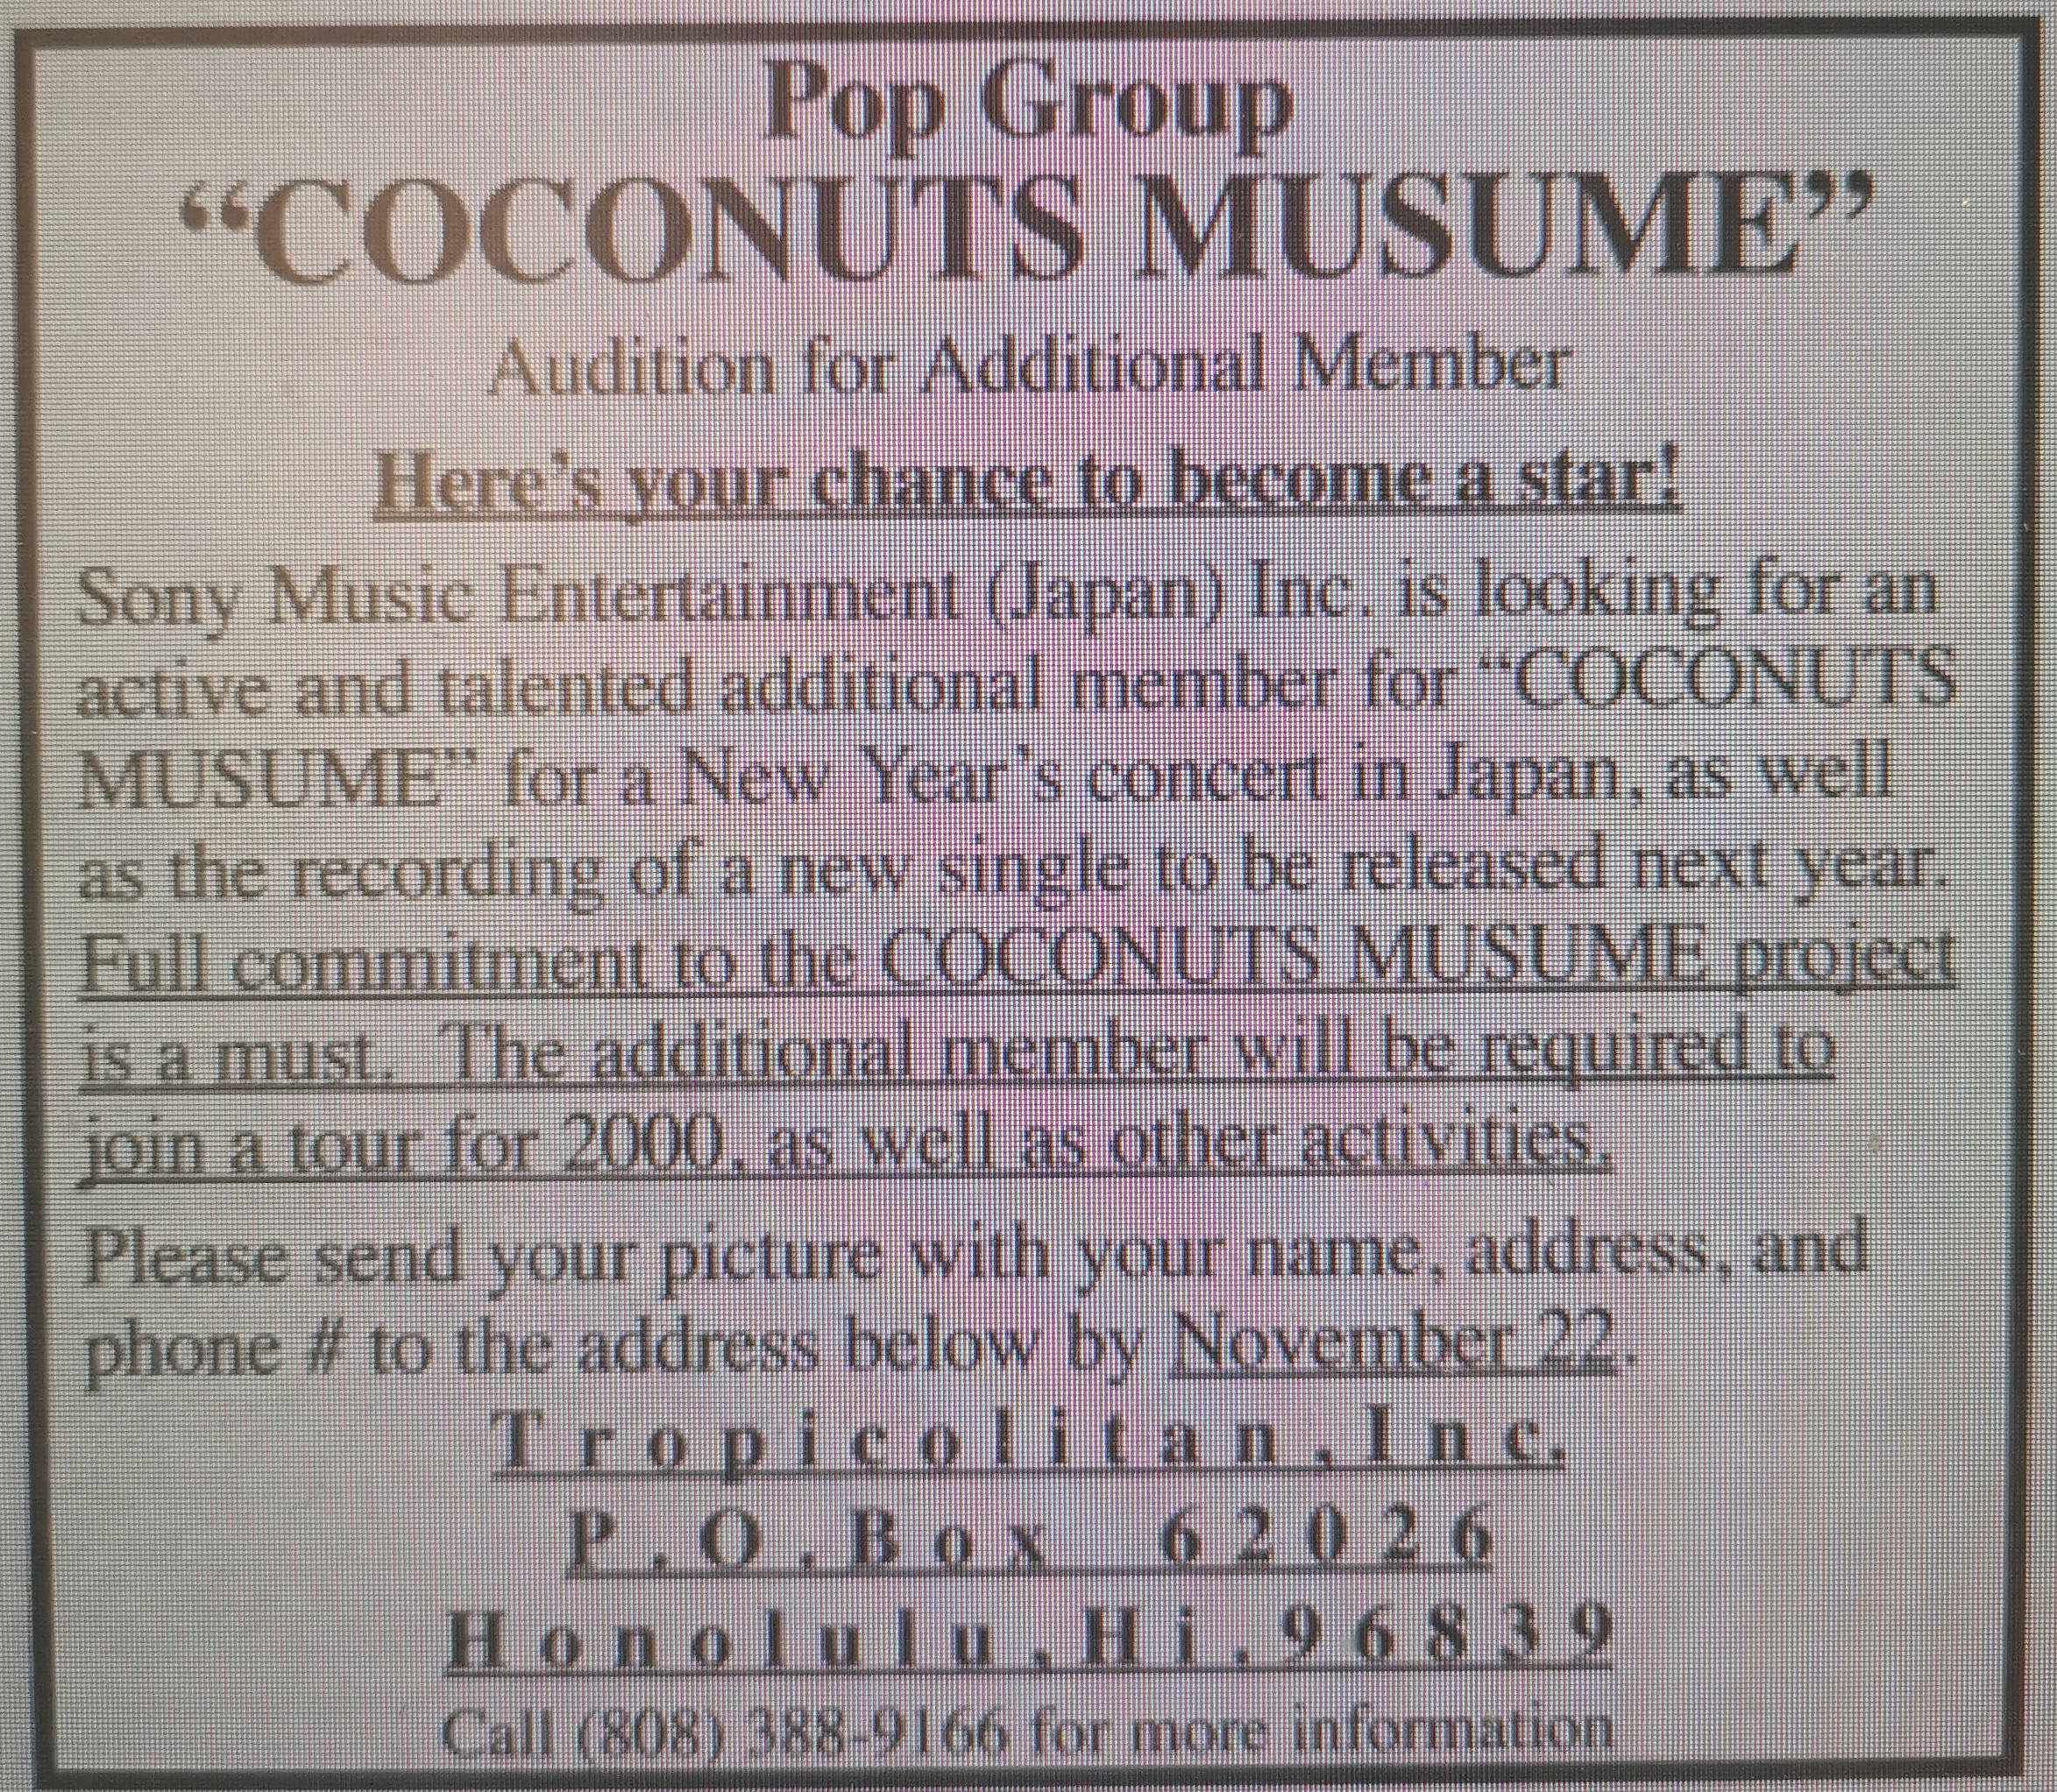 COCONUTS MUSUME AUDITIONS | Hello! Project Wiki | Fandom